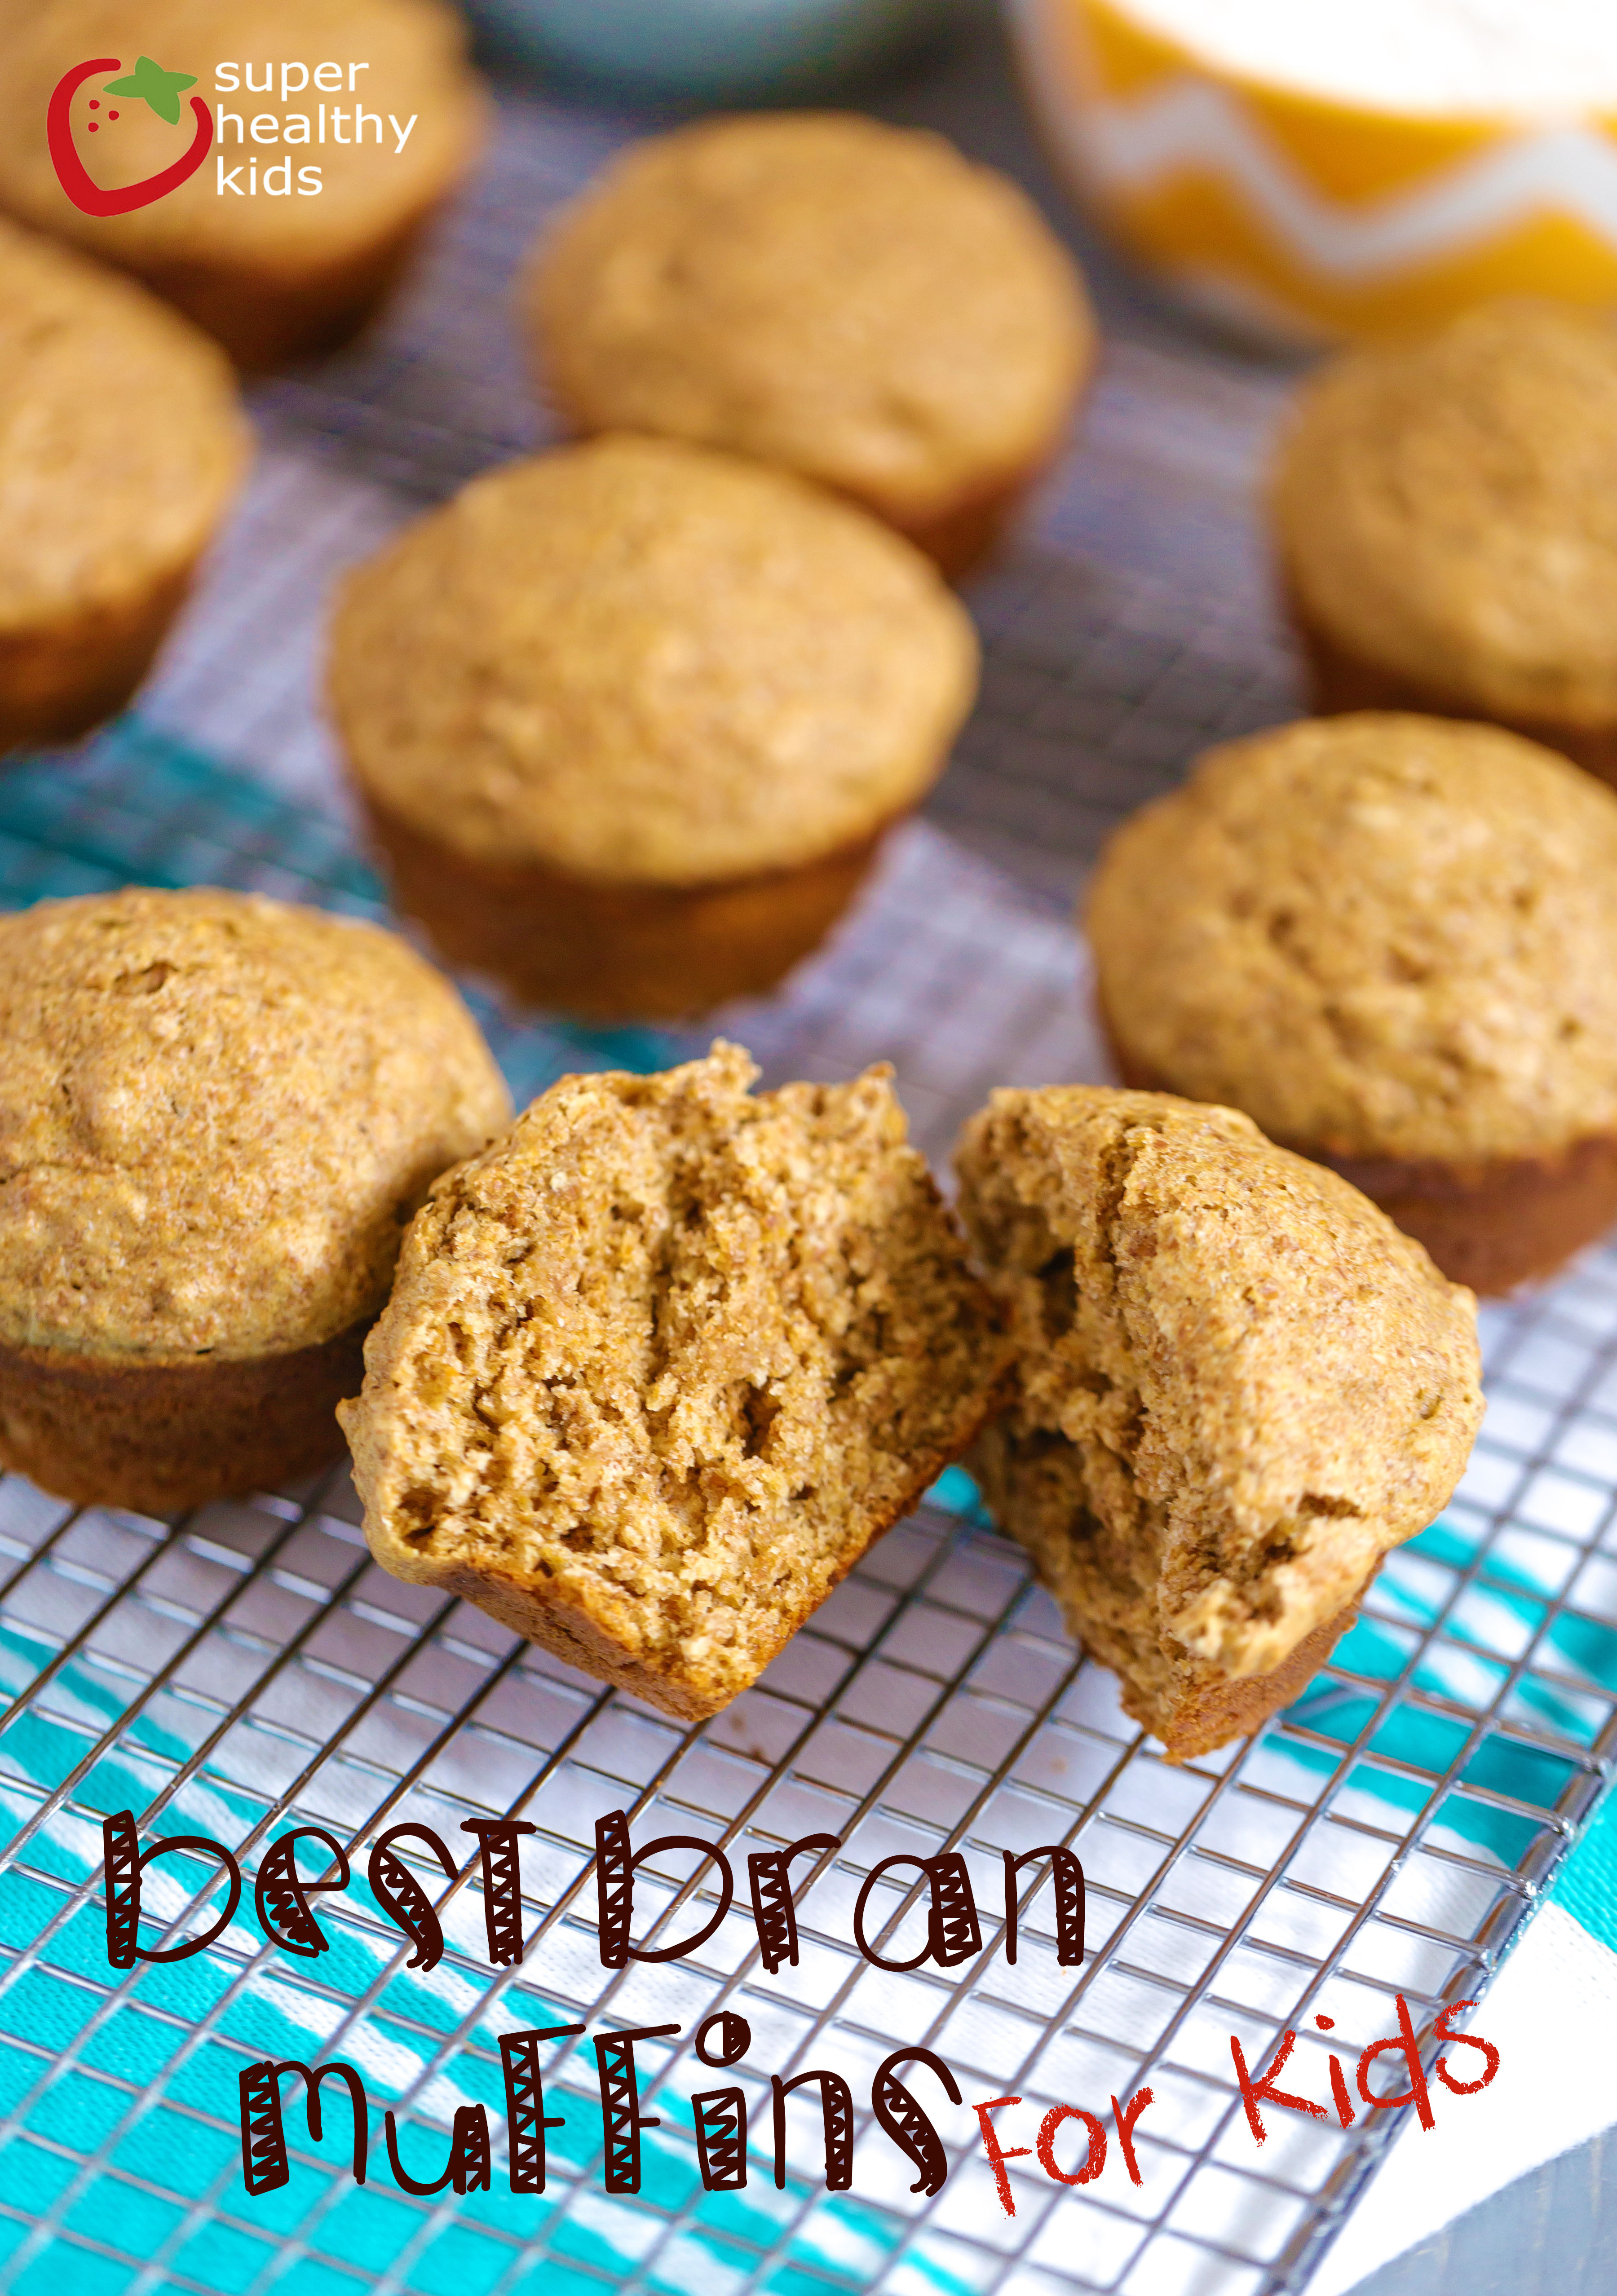 High Fiber Recipes For Toddlers
 Best Bran Muffin Recipe for Kids